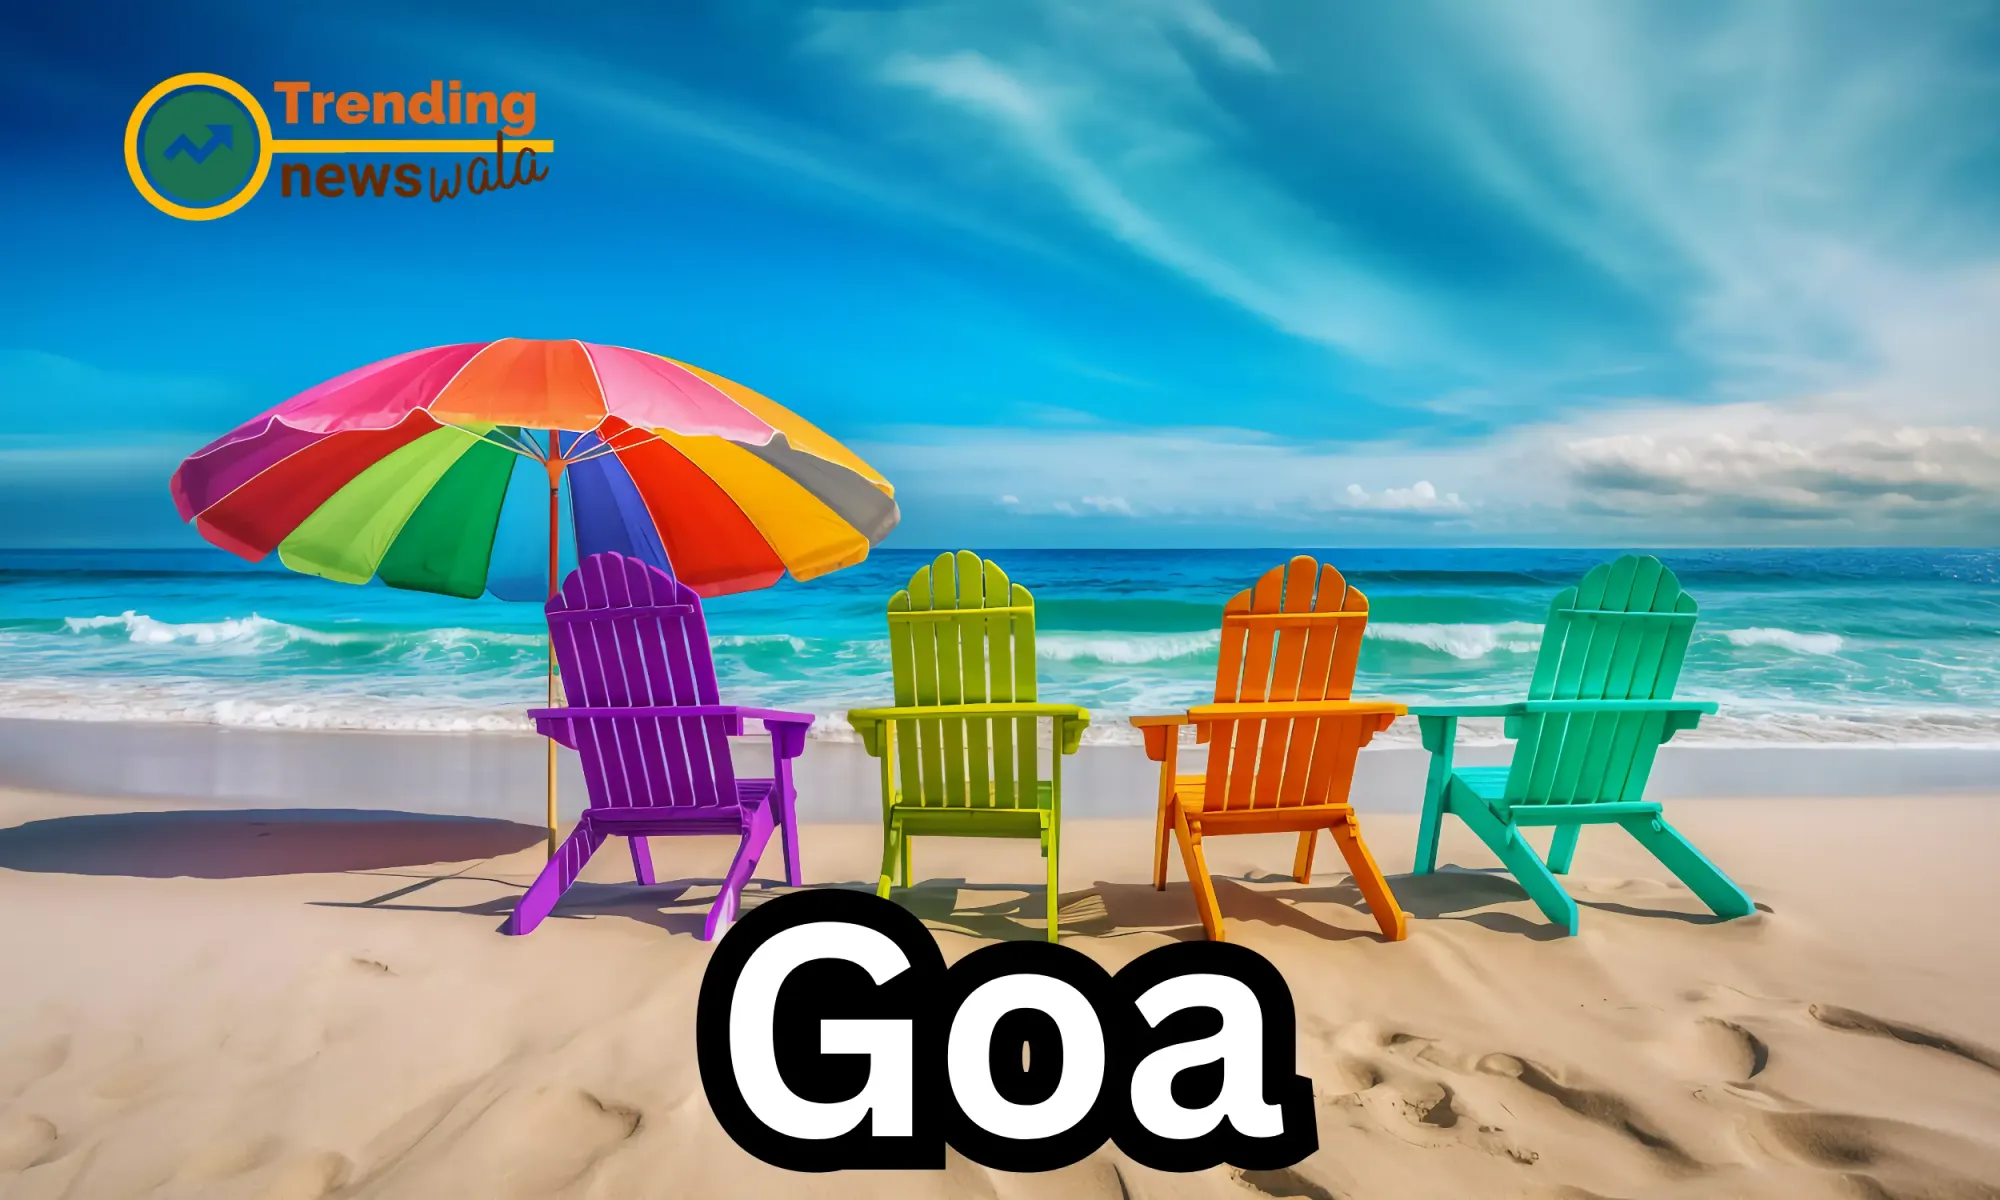 Goa, a small coastal state on the southwestern coast of India, is renowned for its stunning beache